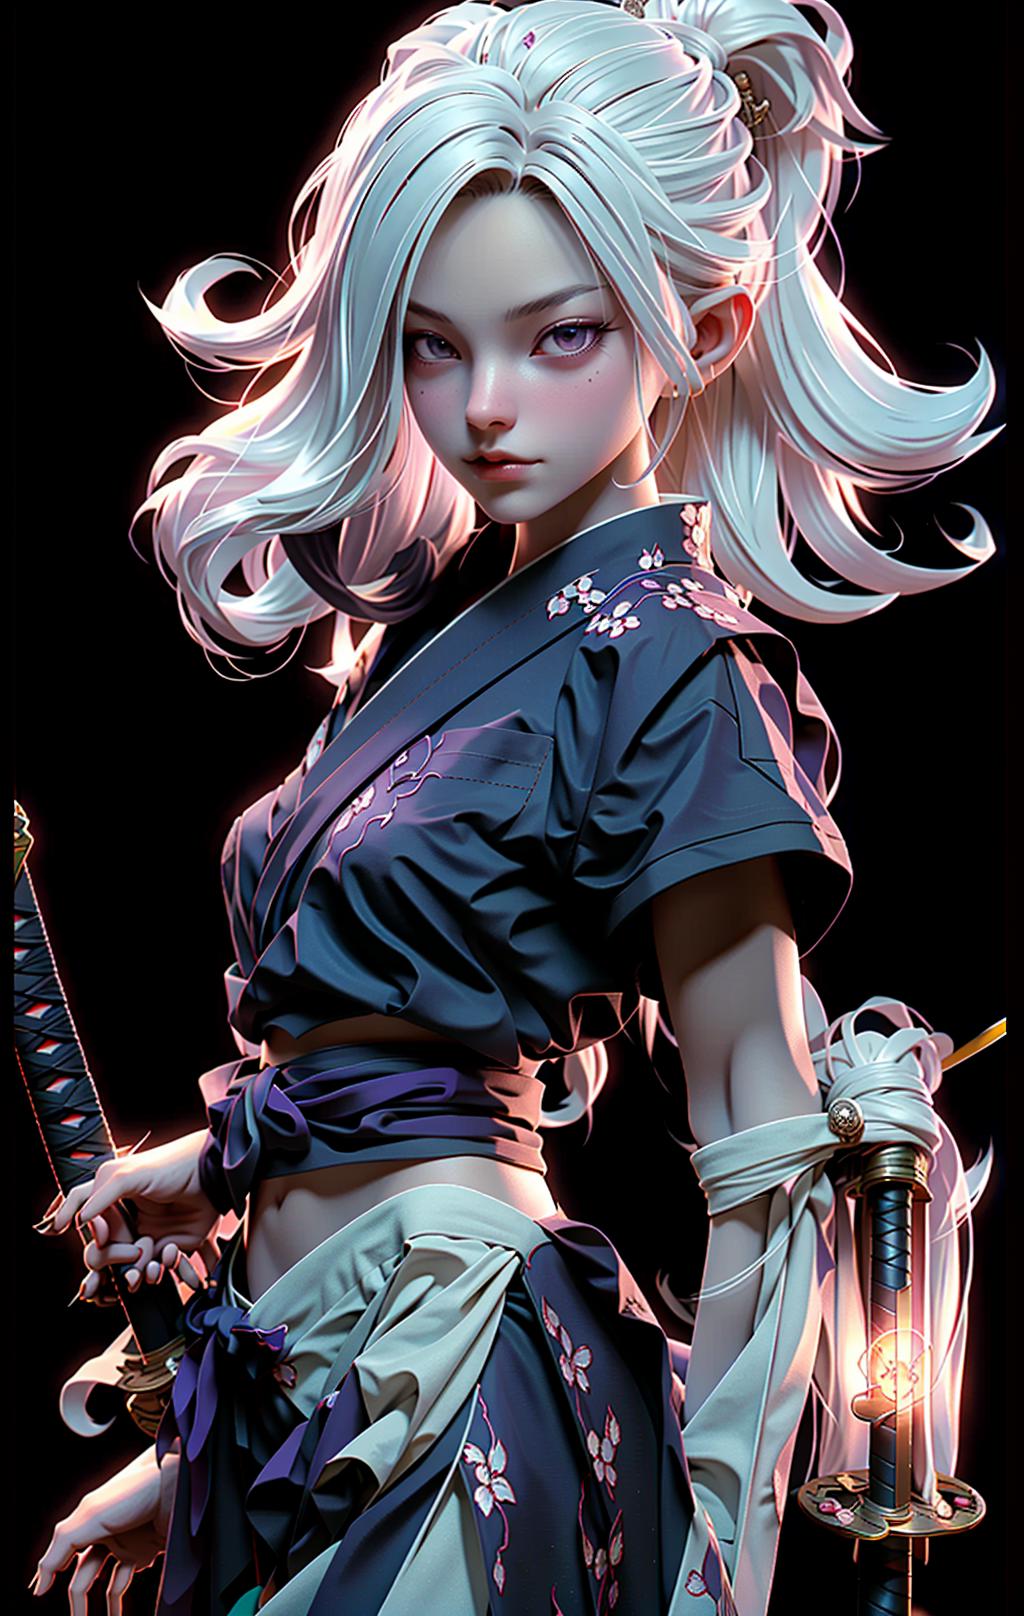 A digital art of a woman with white hair, wearing a black shirt and holding a sword.